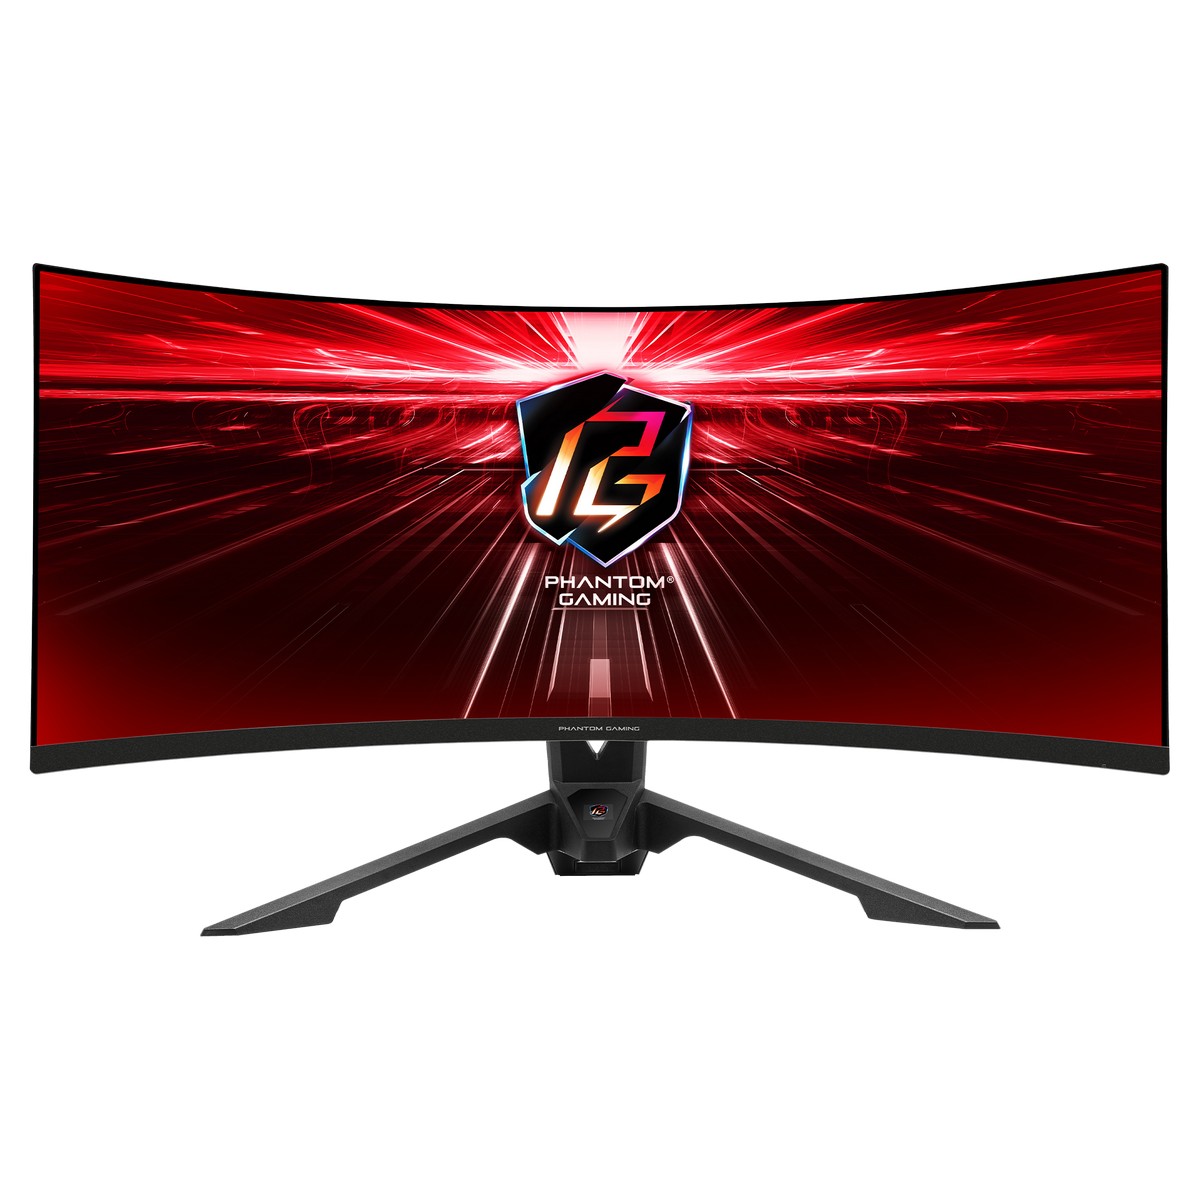  - Asrock 34" PG34WQ15R3A 3440x1440 VA 165Hz 1ms FreeSync HDR 400 Ultrawide Curved Gaming Monitor